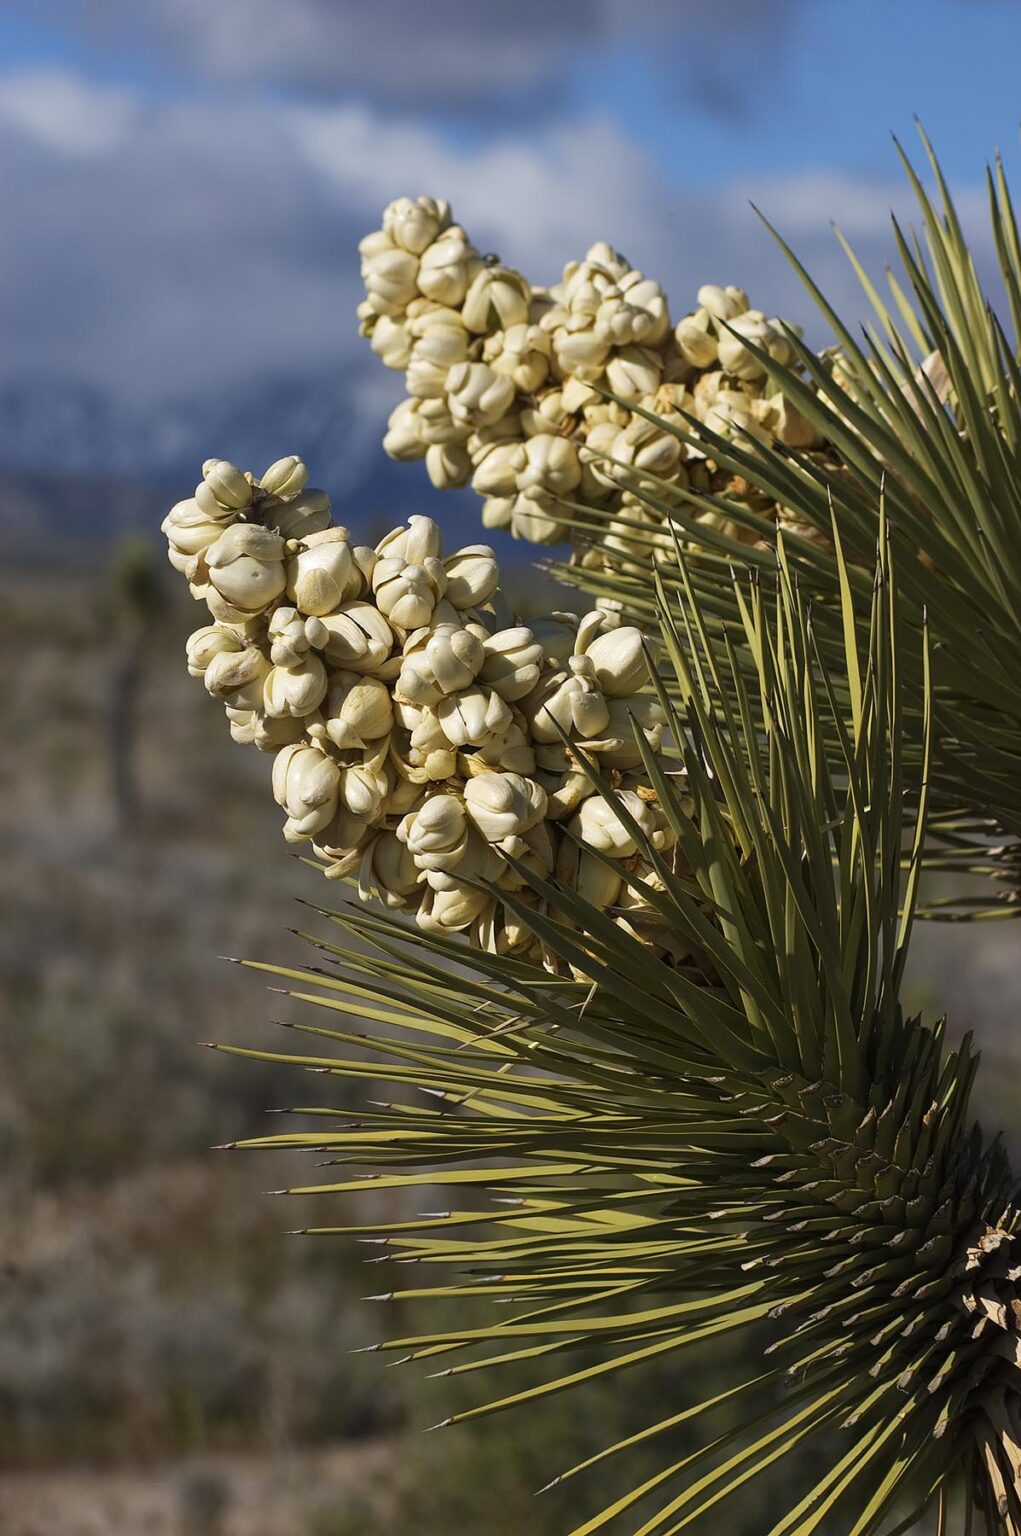 JOSHUA TREES (Yucca Brevifolia) in bloom in the MOJAVE DESERT - SOUTHERN, CALIFORNIA